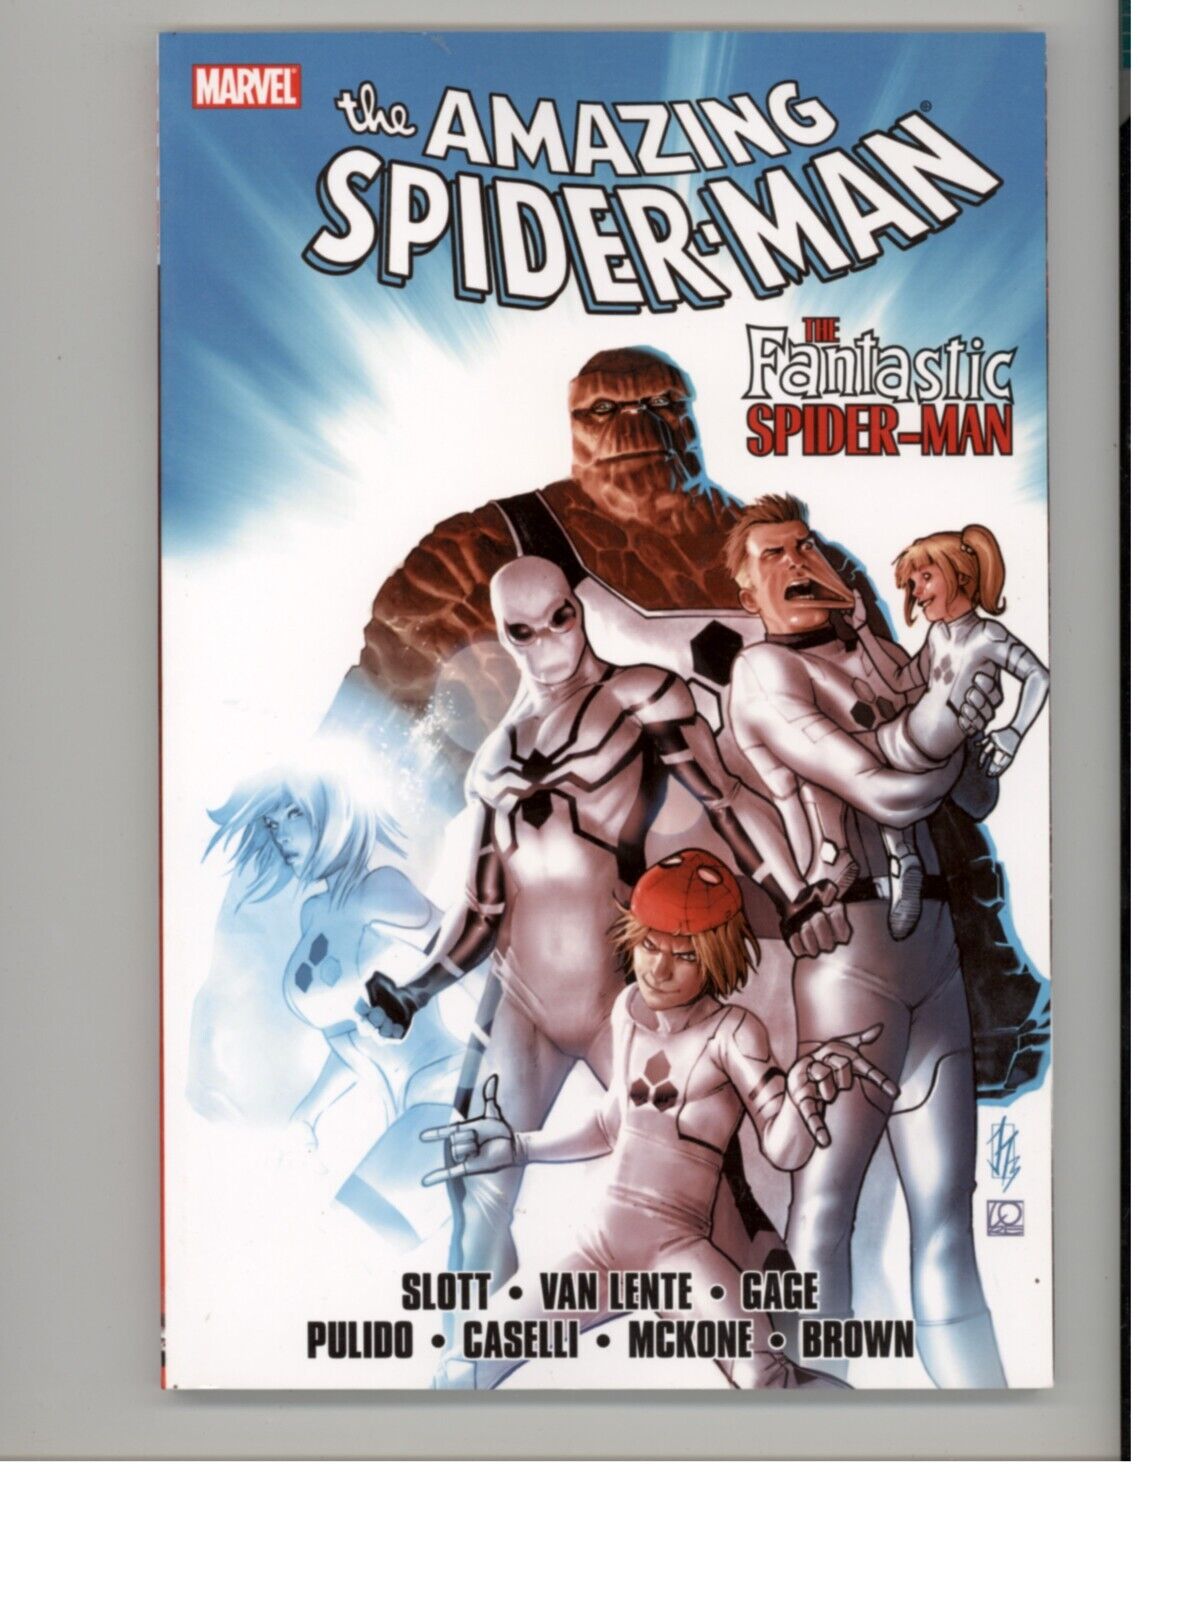 Amazing Spider-Man: The Fantastic Spider-Man NEW Never Read TPB